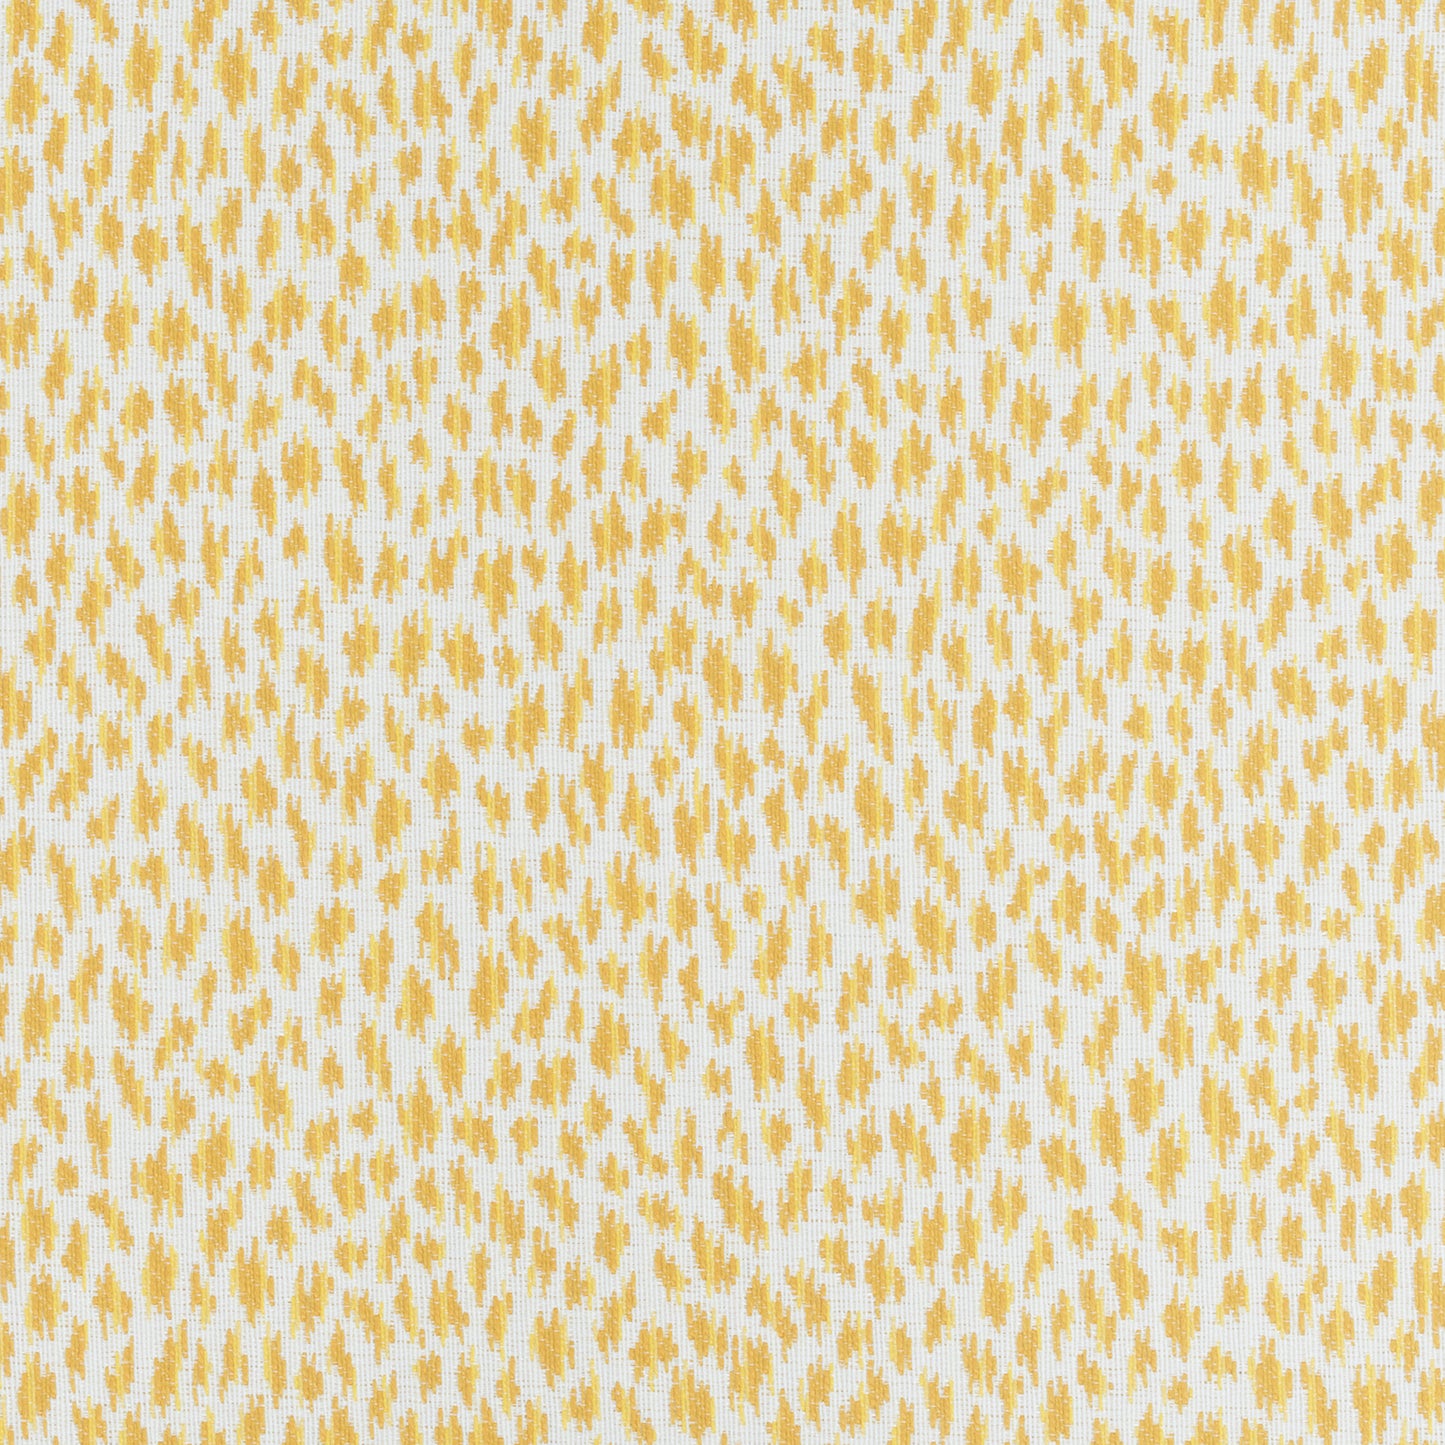 Purchase Thibaut Fabric Product# W80454 pattern name Citra color Yellow